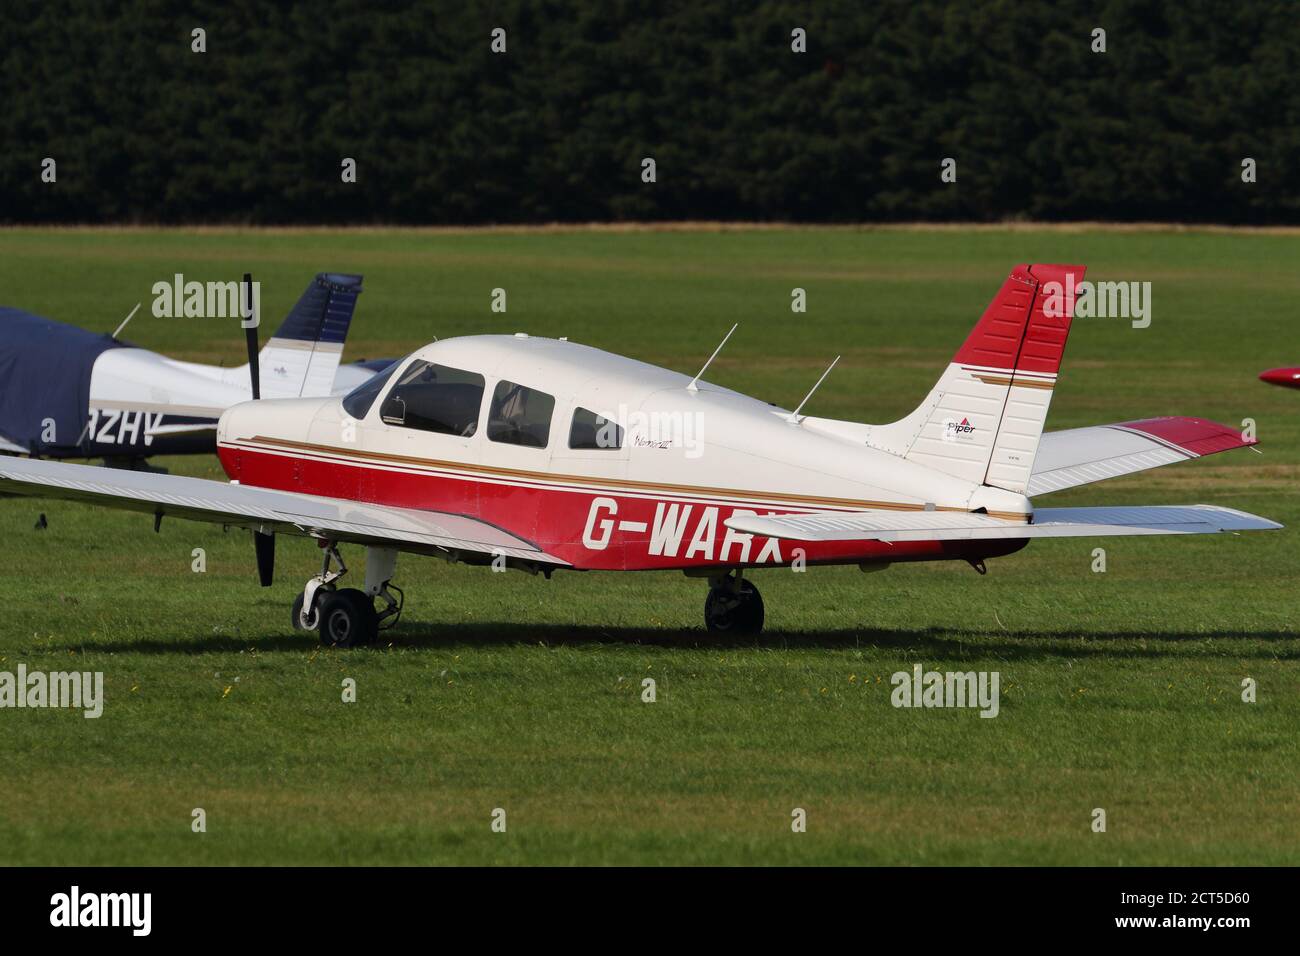 Piper PA-28 Warrior III G-WARX parked at White Waltham Airfield, UK Stock Photo